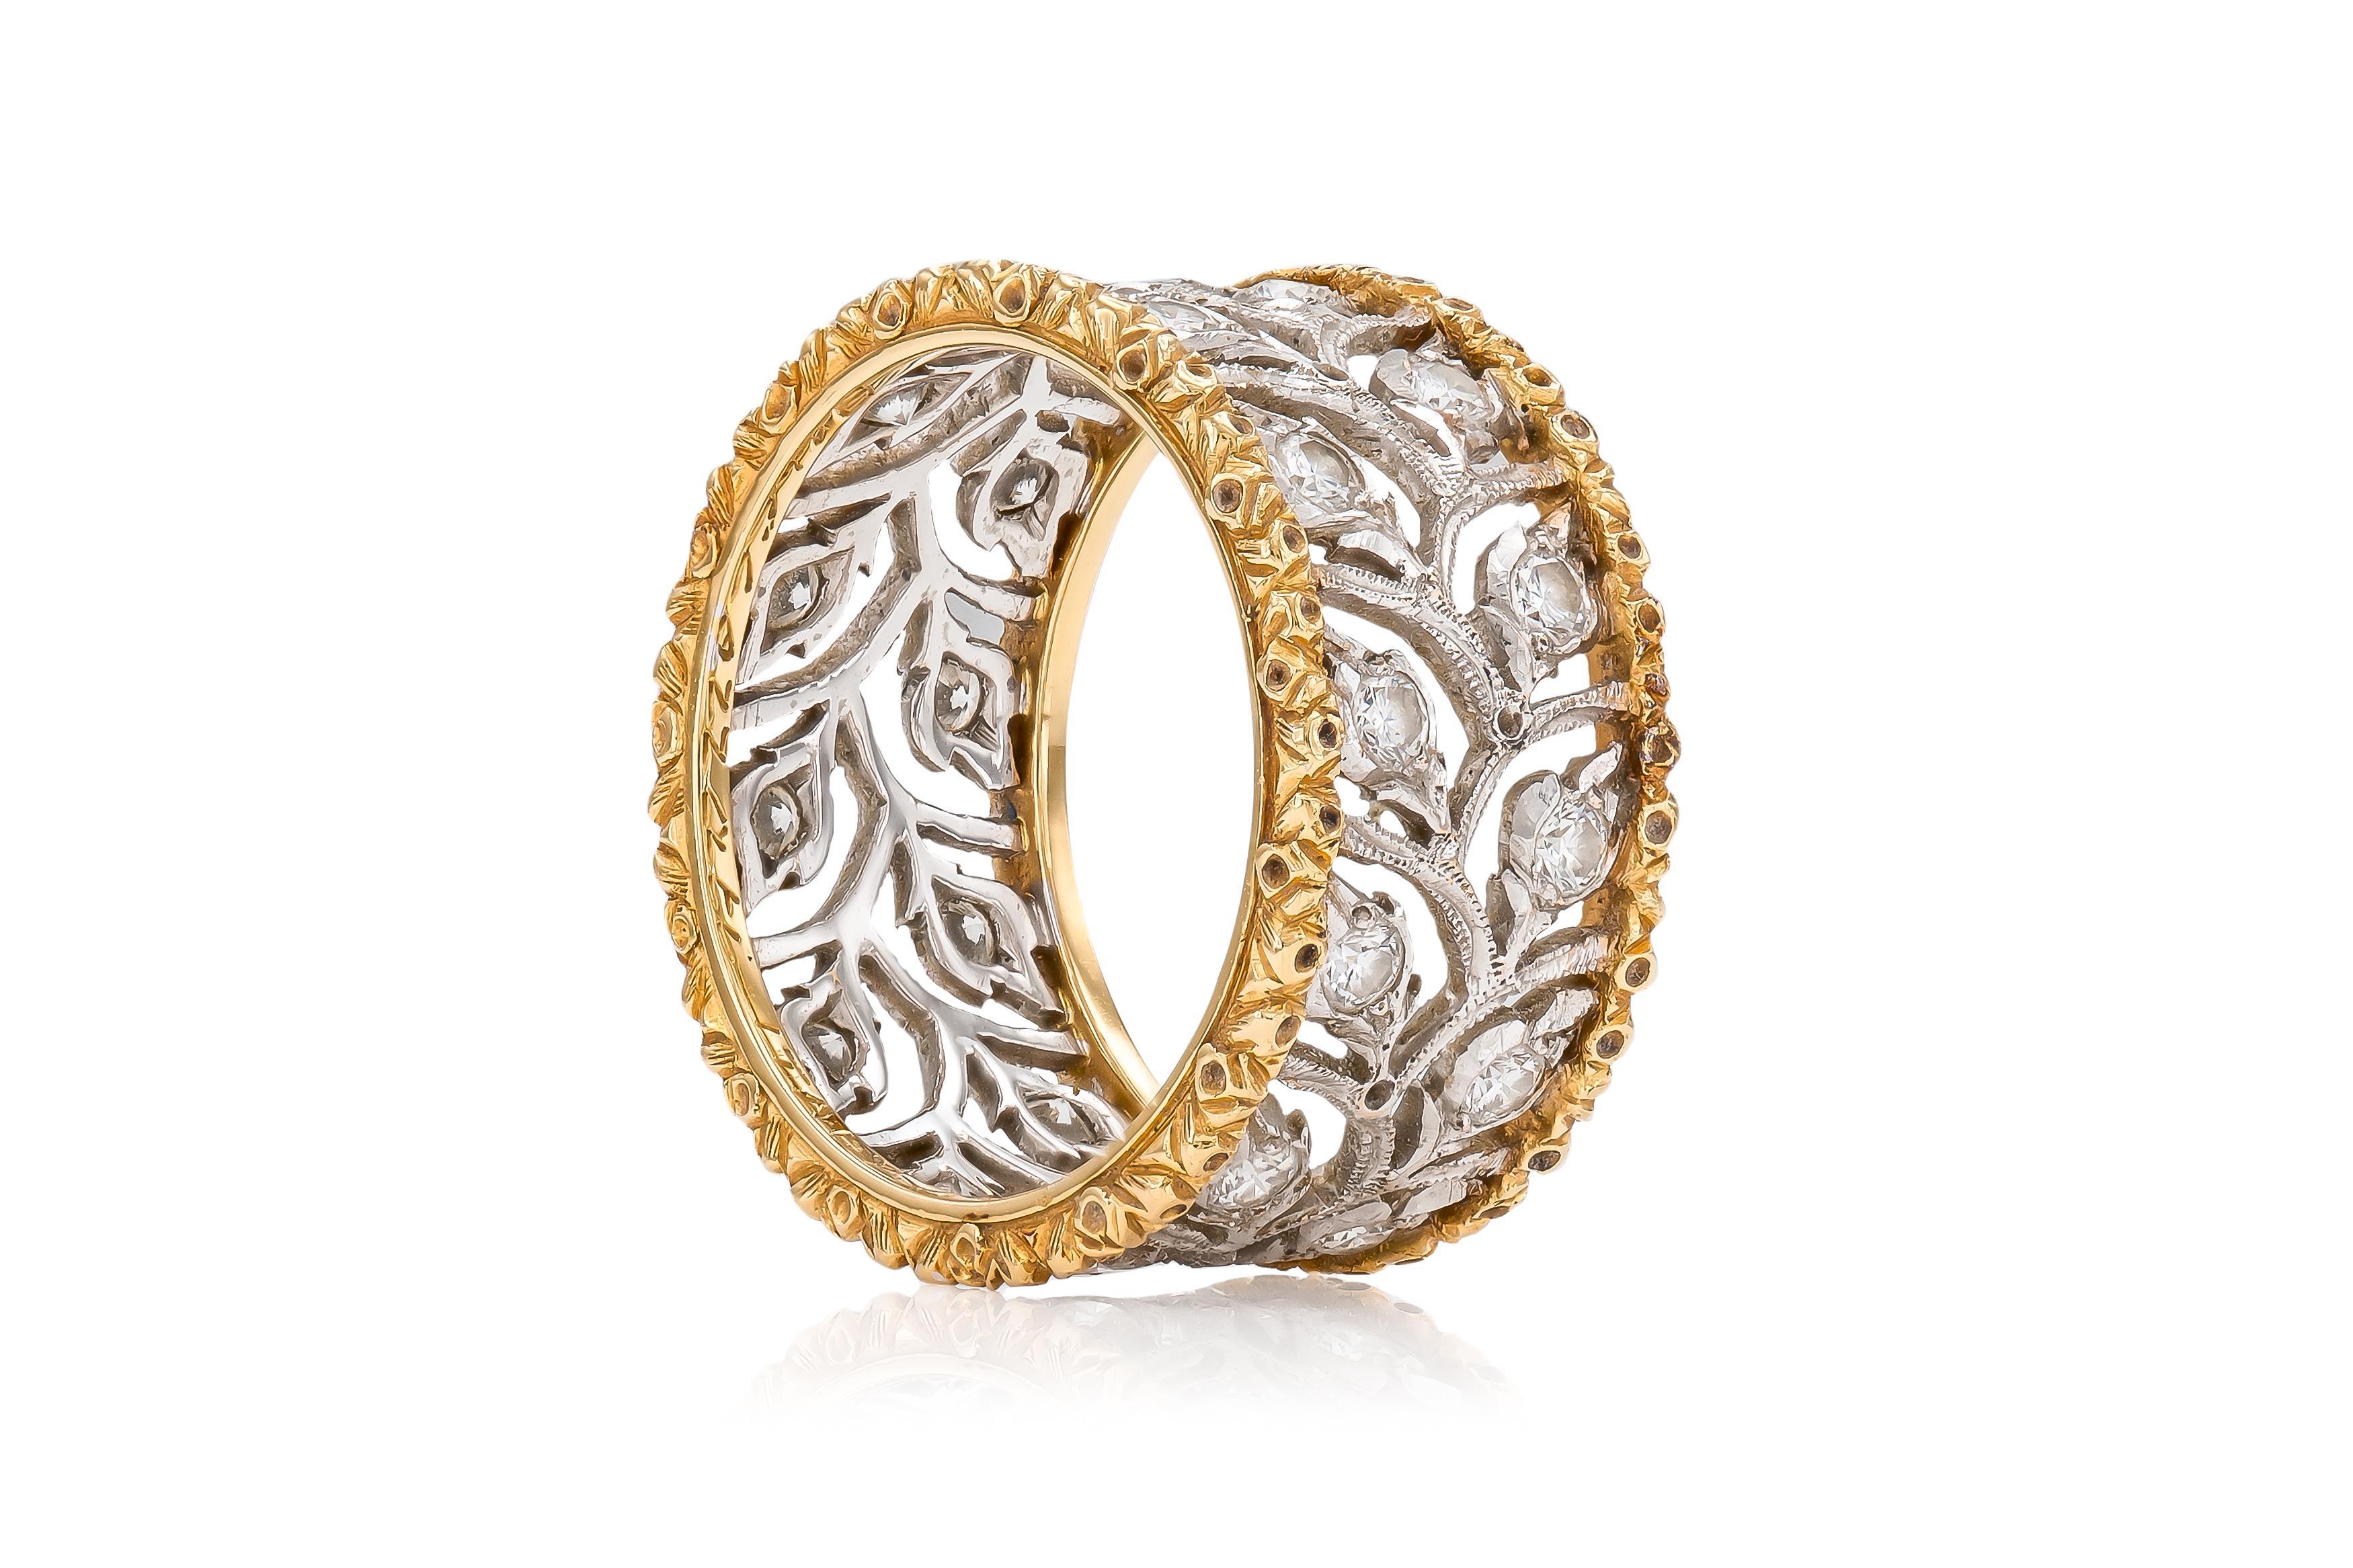 Finely crafted in 18k white and yellow gold with small Round Brilliant cut Diamonds.
Signed by Buccellati
Size 5